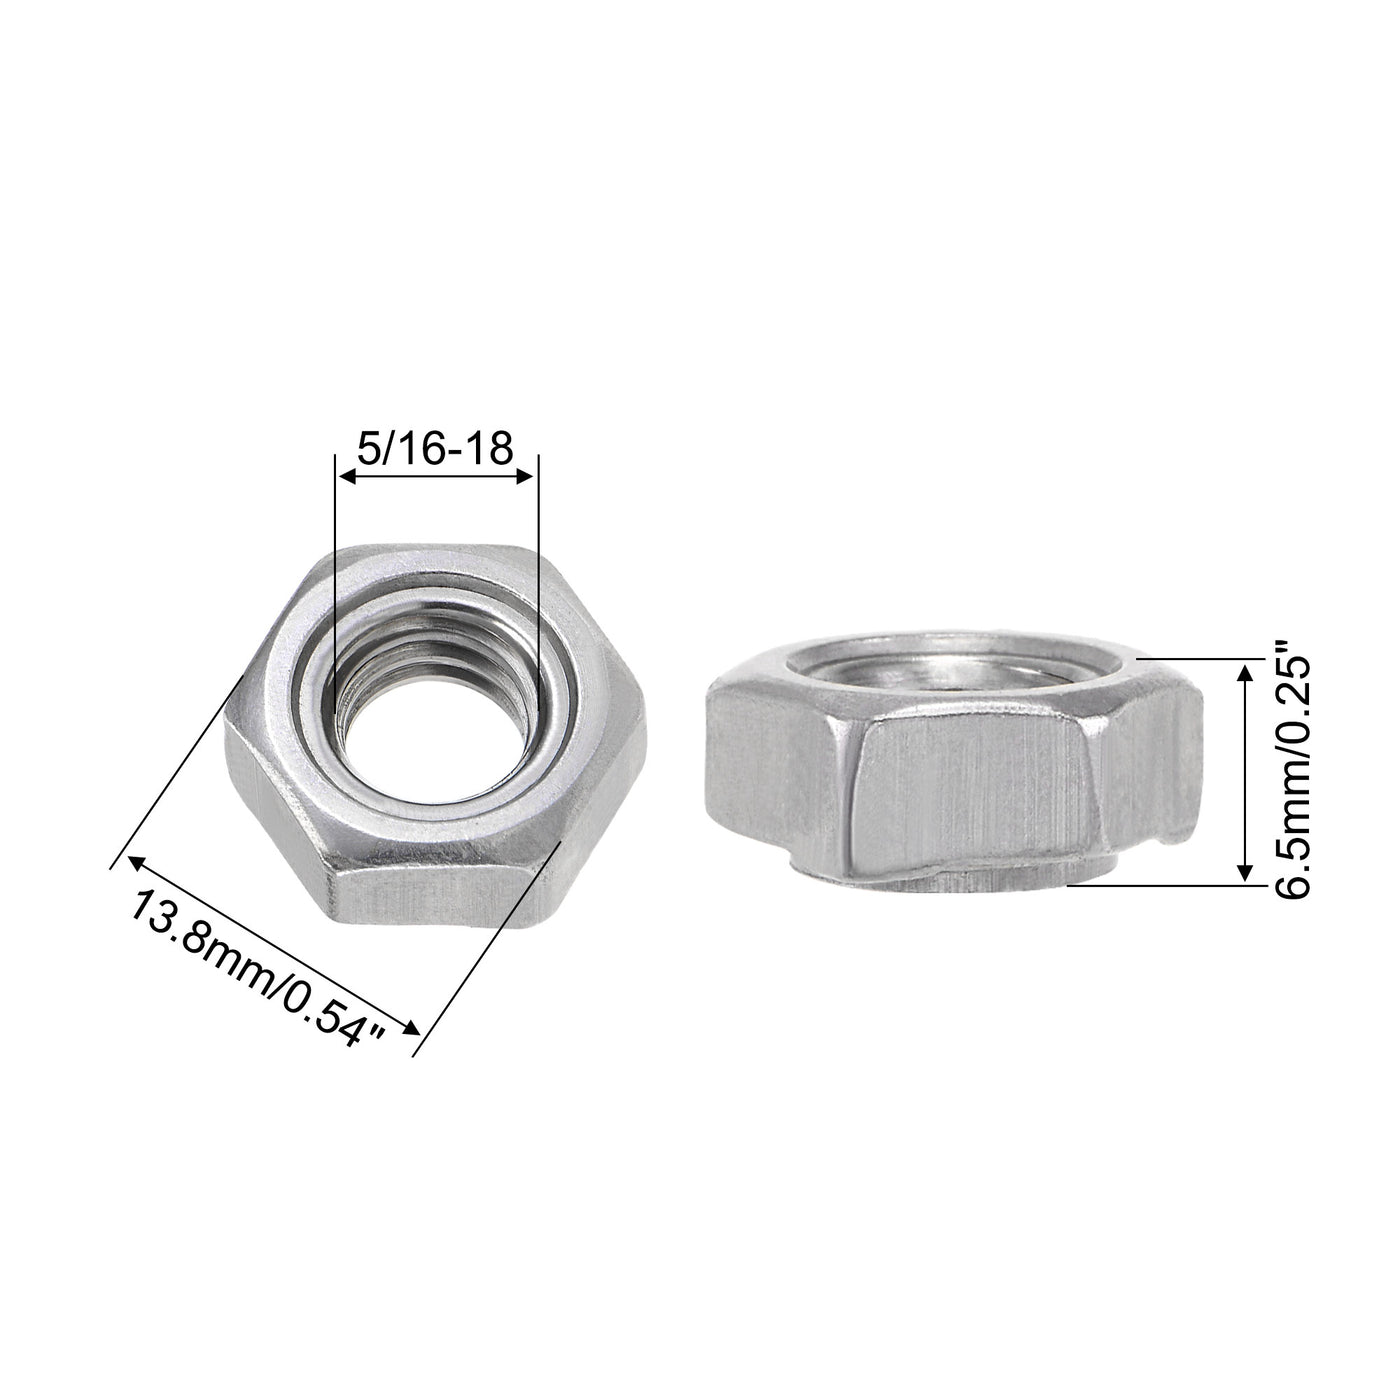 Uxcell Uxcell Hex Weld Nuts,1/2-13 Carbon Steel with 3 Projections Machine Screw Gray 20pcs